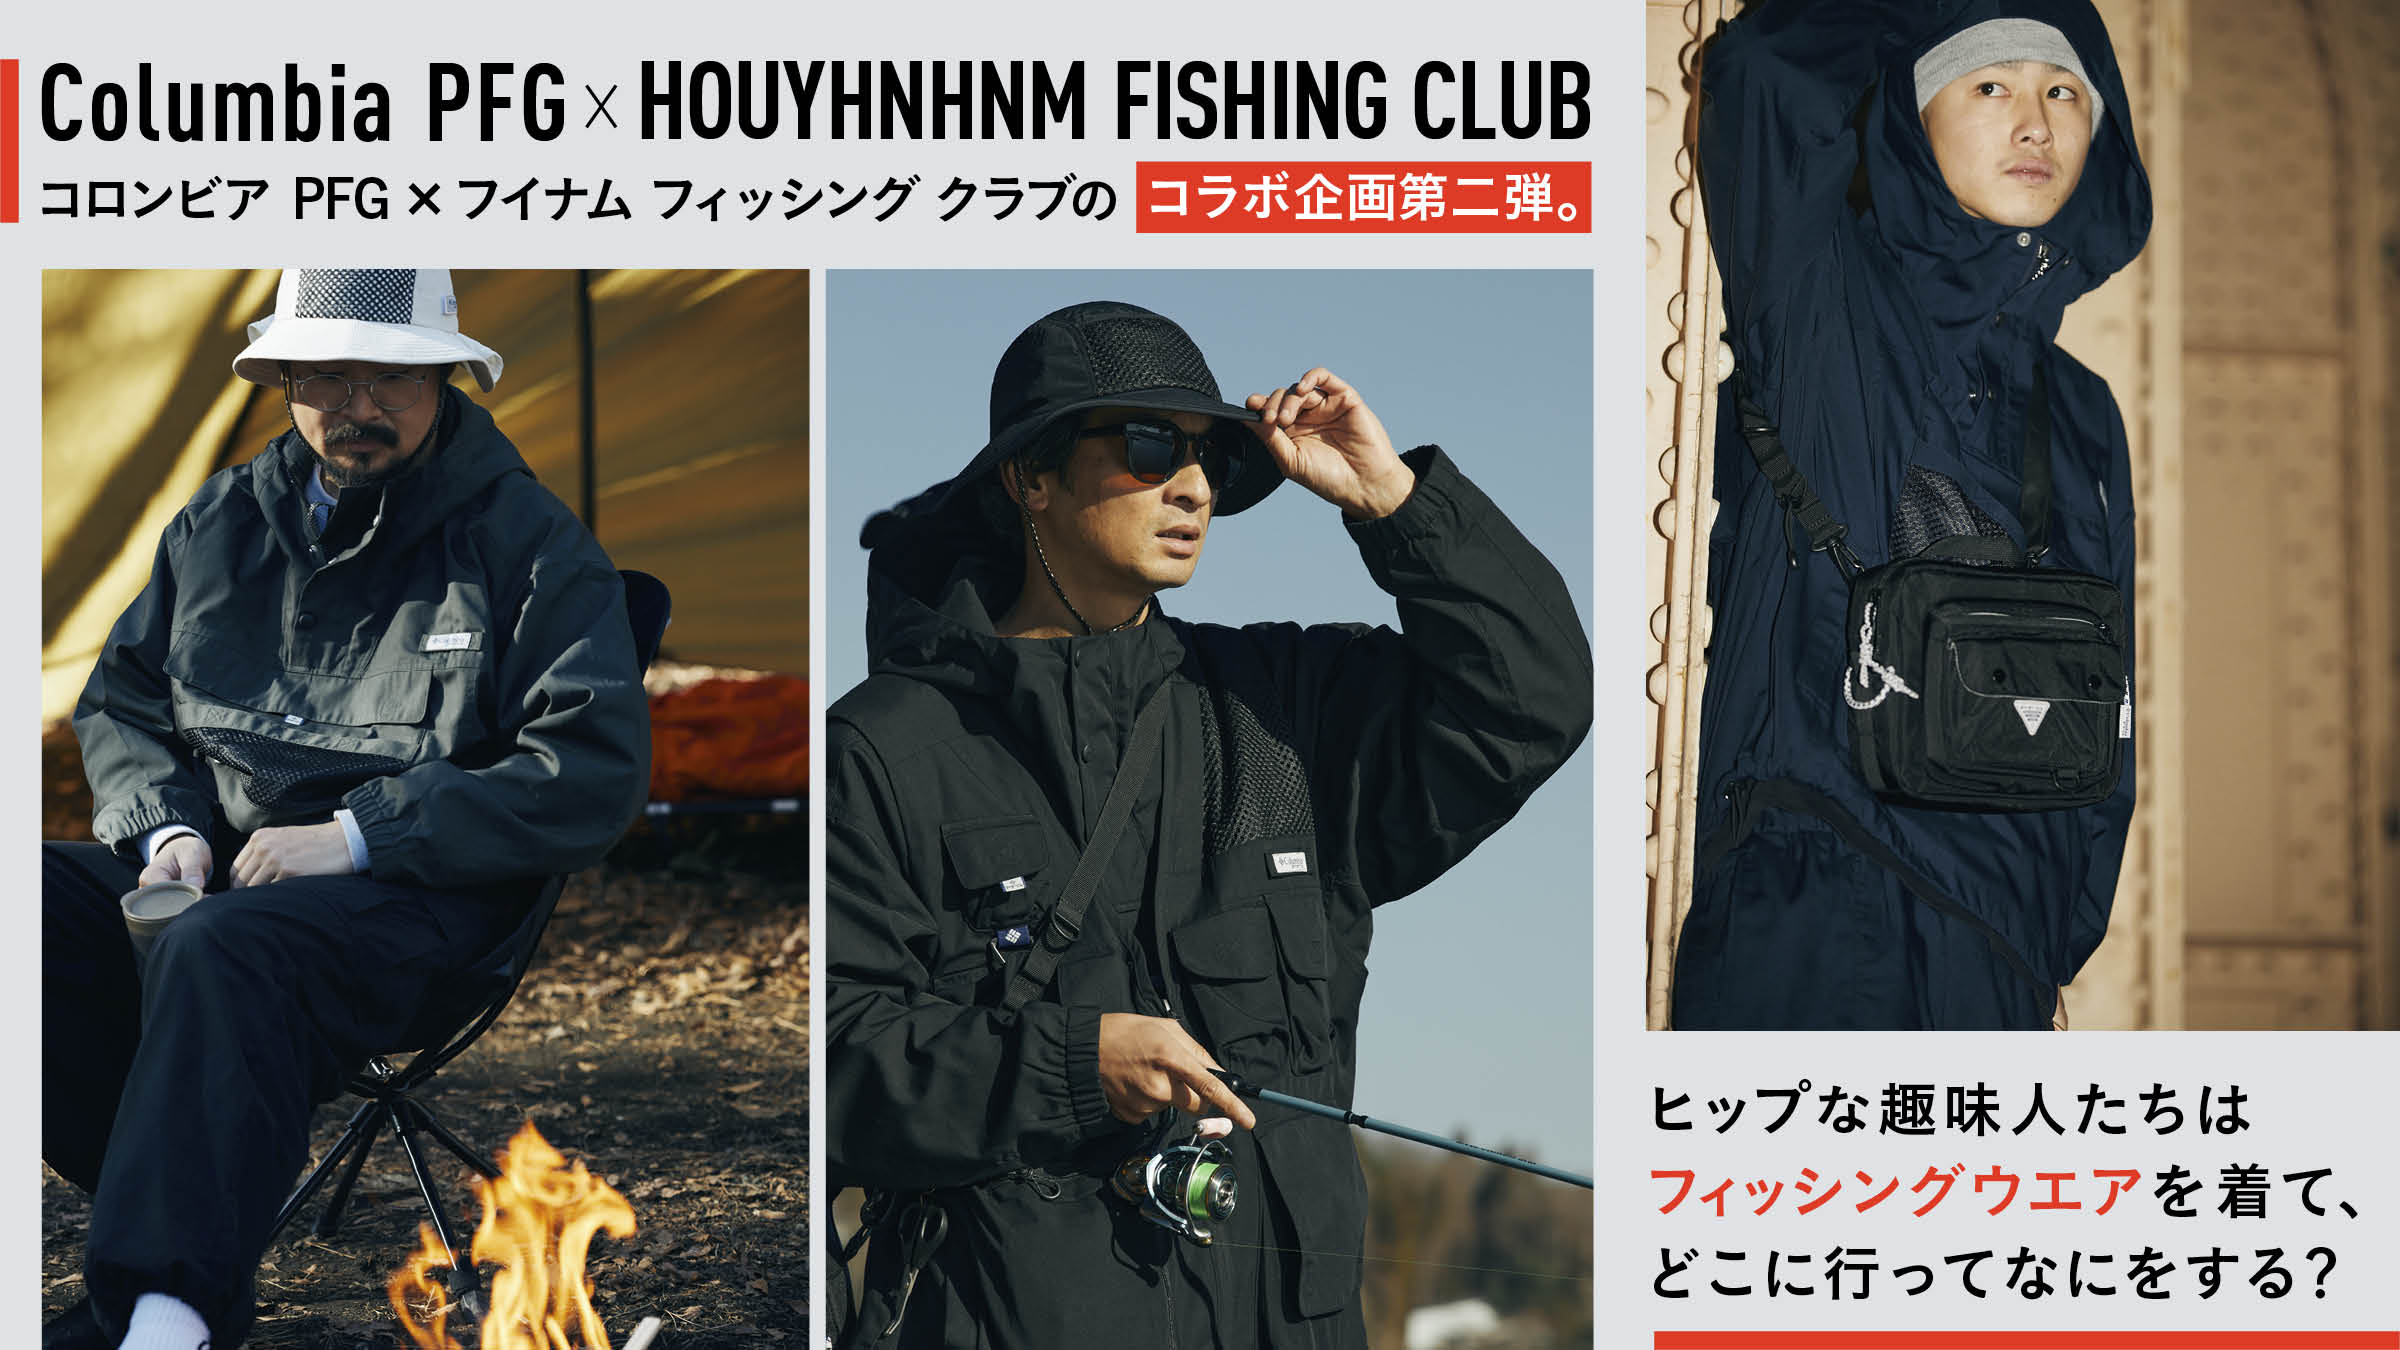 Columbia PFG x HOUYHNHNM FISHING CLUB's second collaborative project. Where do hip hobbyists go and what do they do in their fishing wear?